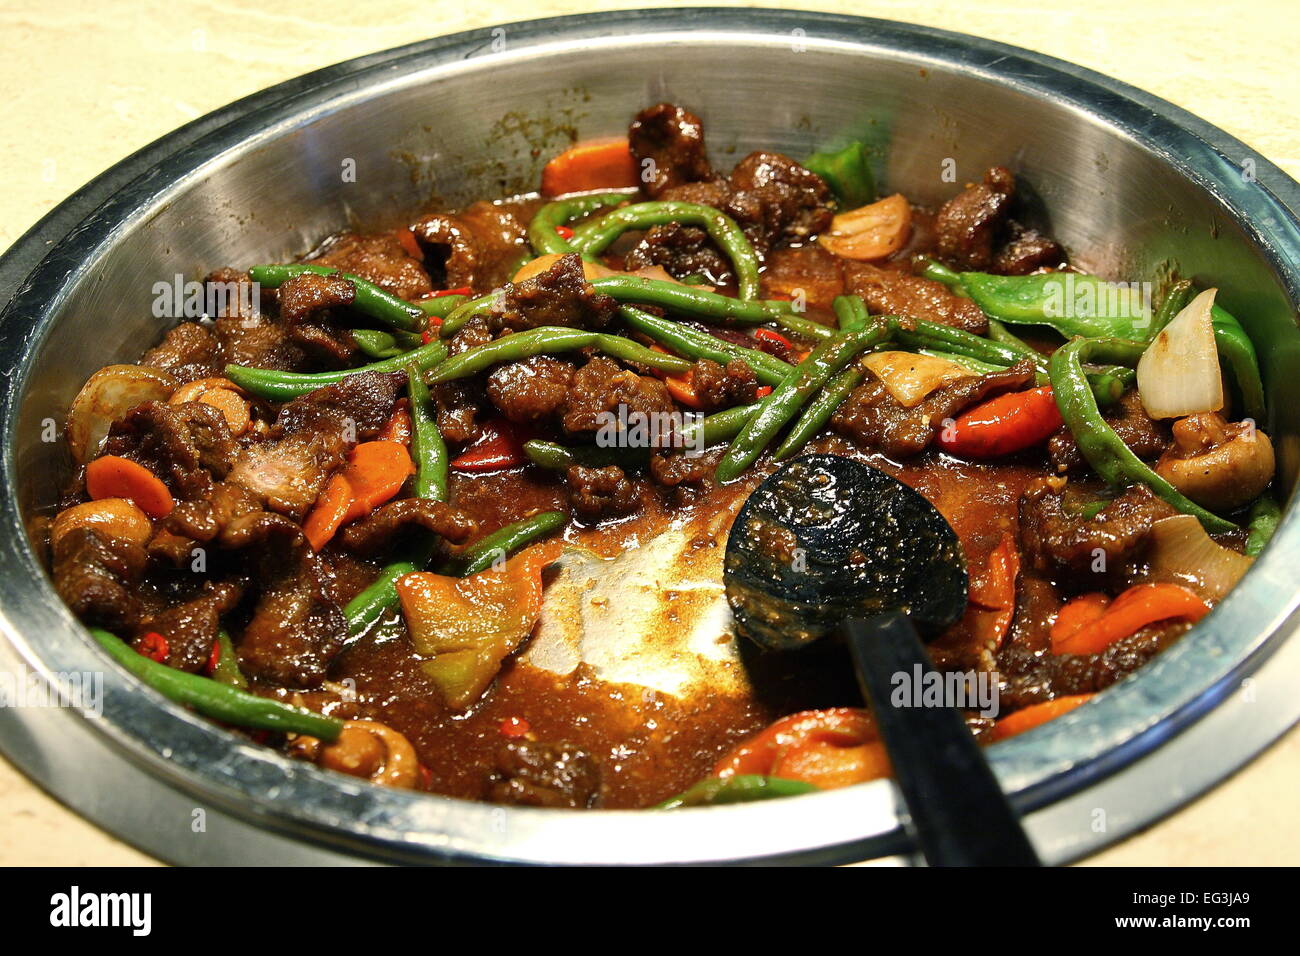 Beef stir fry with Vegetables Stock Photo